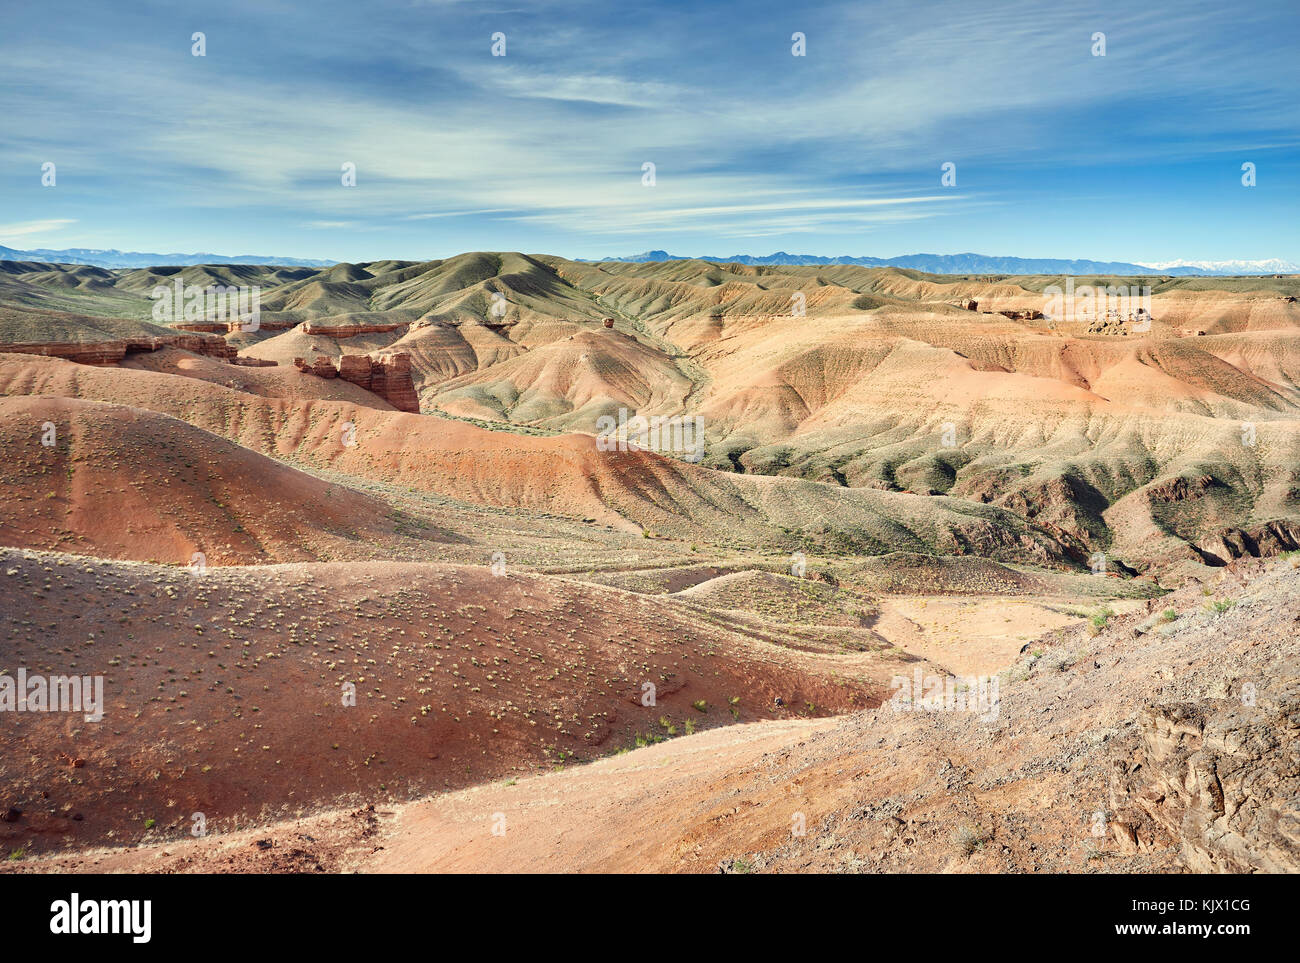 Landscape of hills and rocks in the Charyn canyon in Kazakhsthan Stock Photo